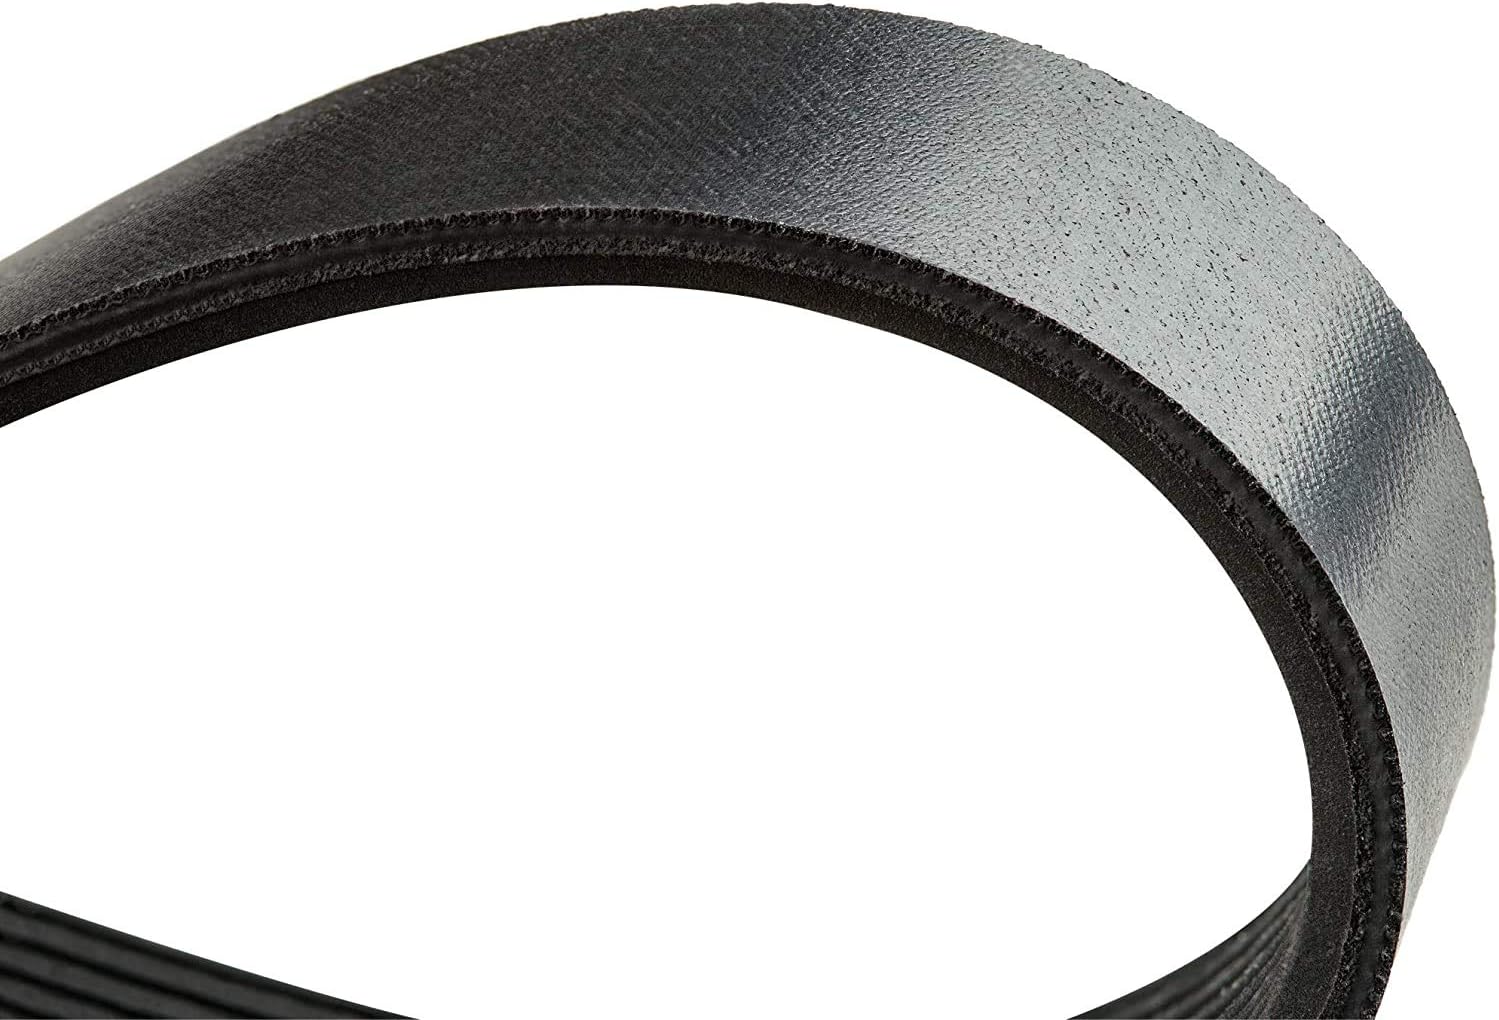 Hasmx 2-Pack 24" Length Drive Belts for Sears Craftsman Band Saw Models 119.224000, 119.224010, 351.224000 Replaces Part Numbers